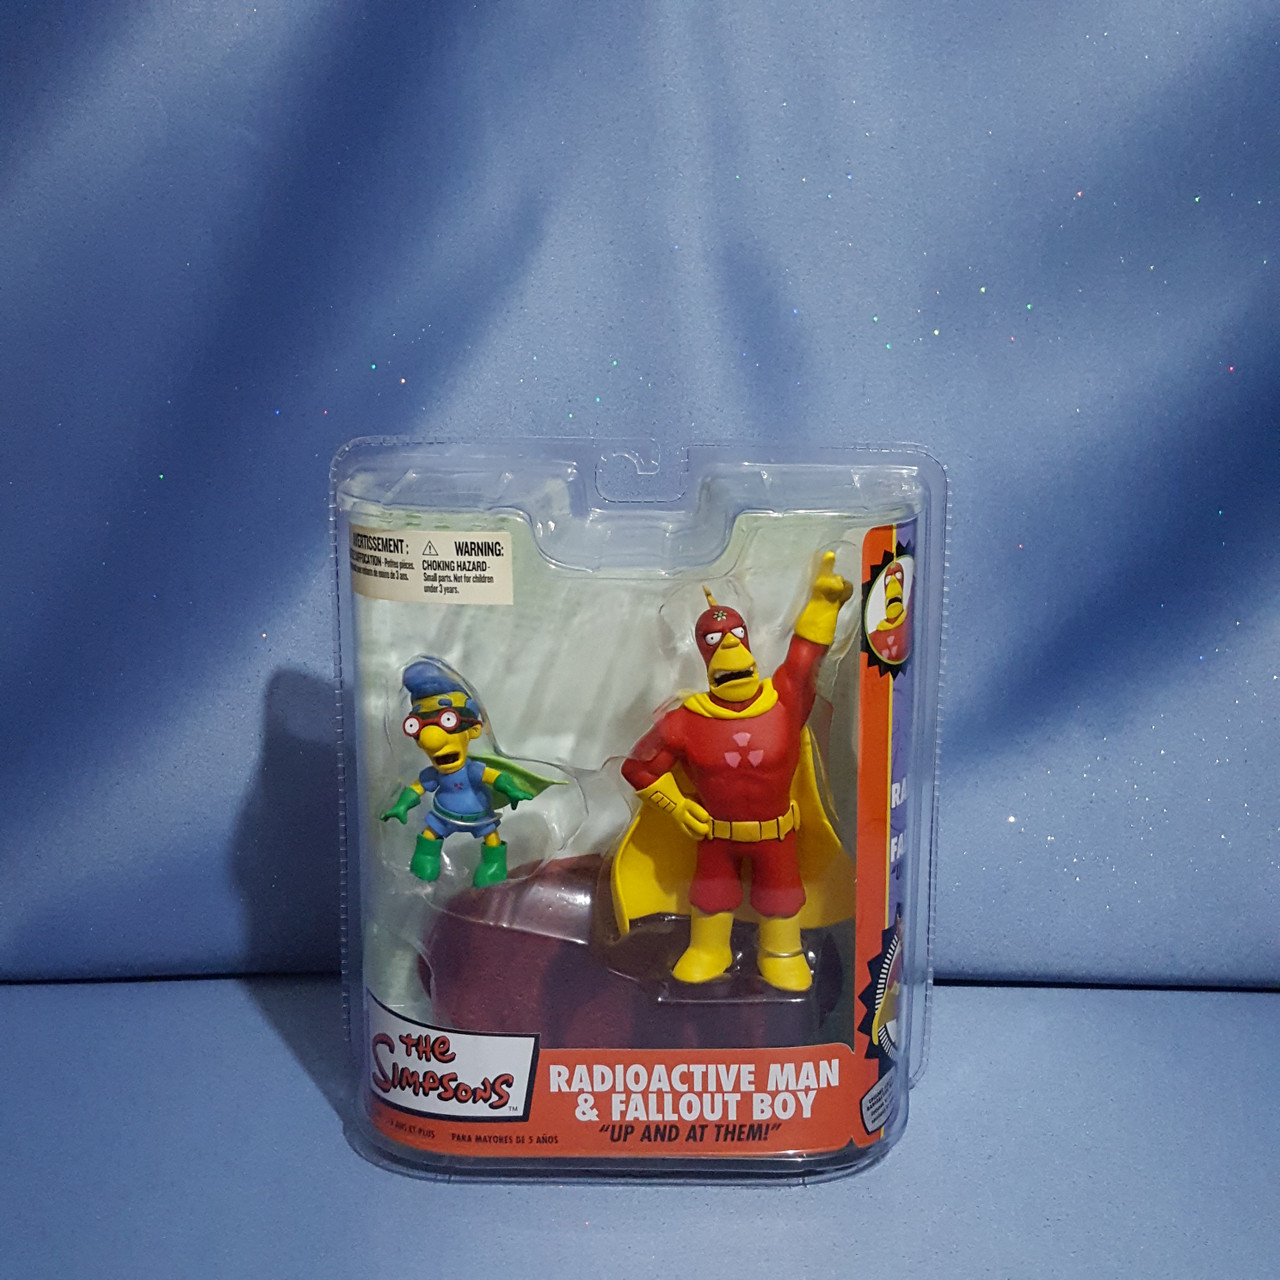 The Simpsons Radioactive Man and Fallout Boy Action Figures by McFarlane  Toys. - Now and Then Galleria LLC